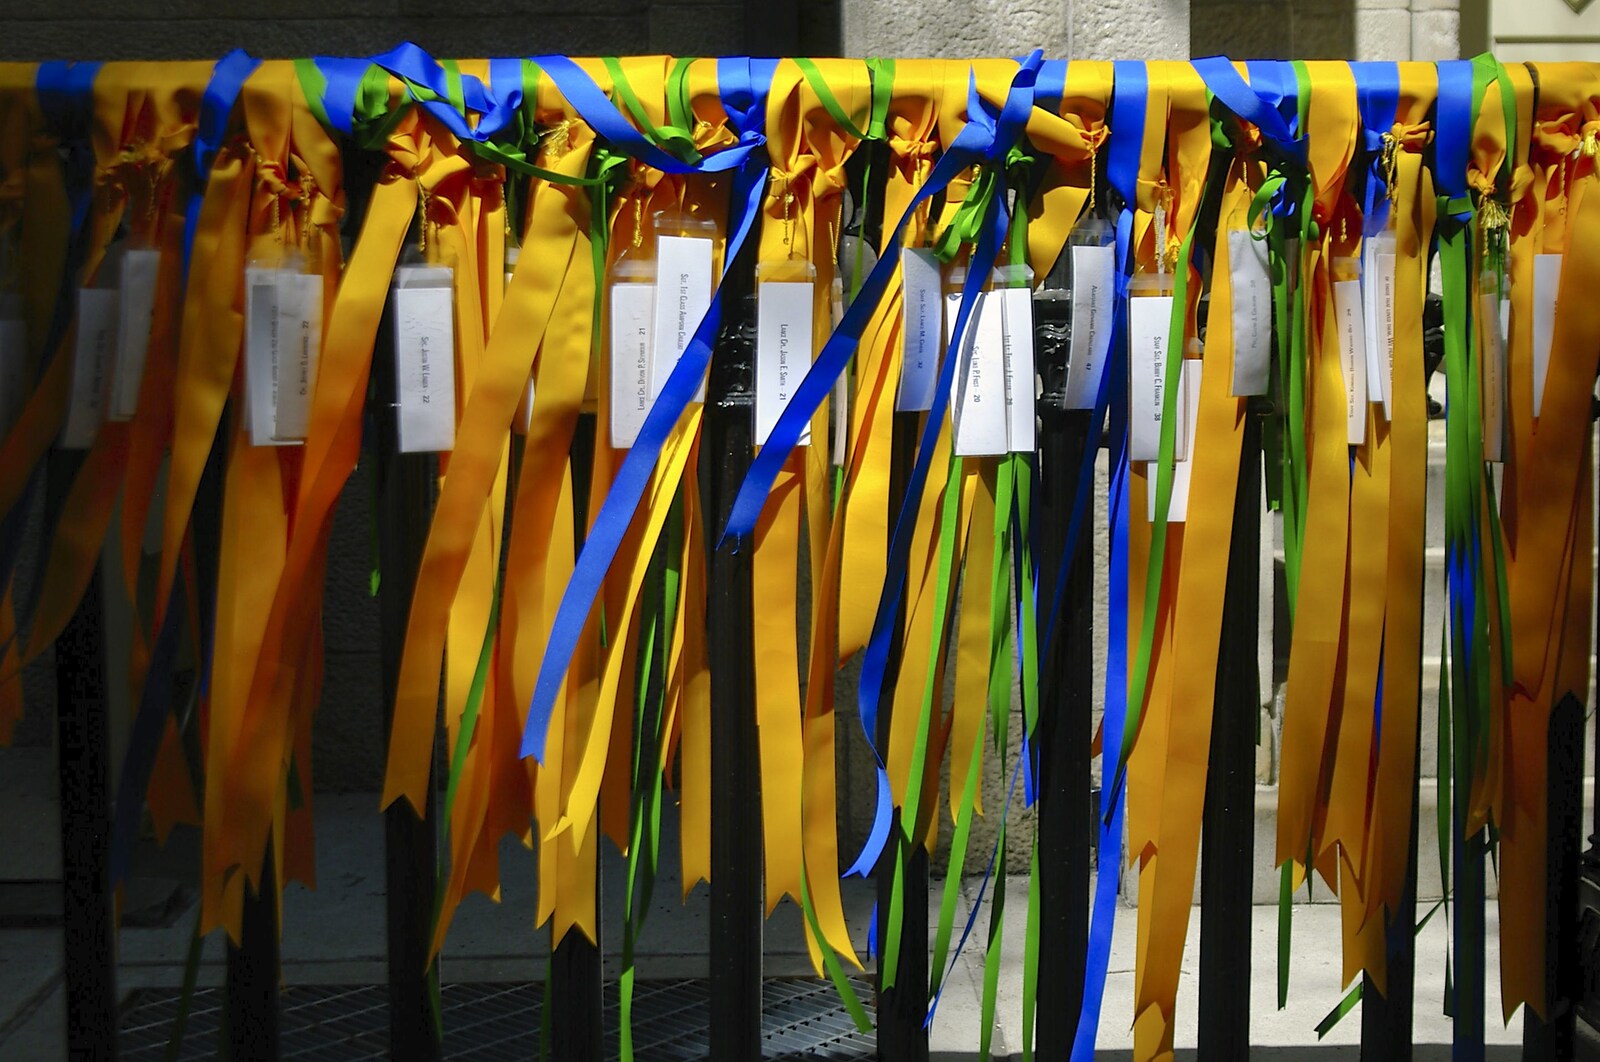 Prayer ribbons at the Dutch Protestant church from Times Square, the Empire State and Ground Zero, New York, US - 1st May 2006